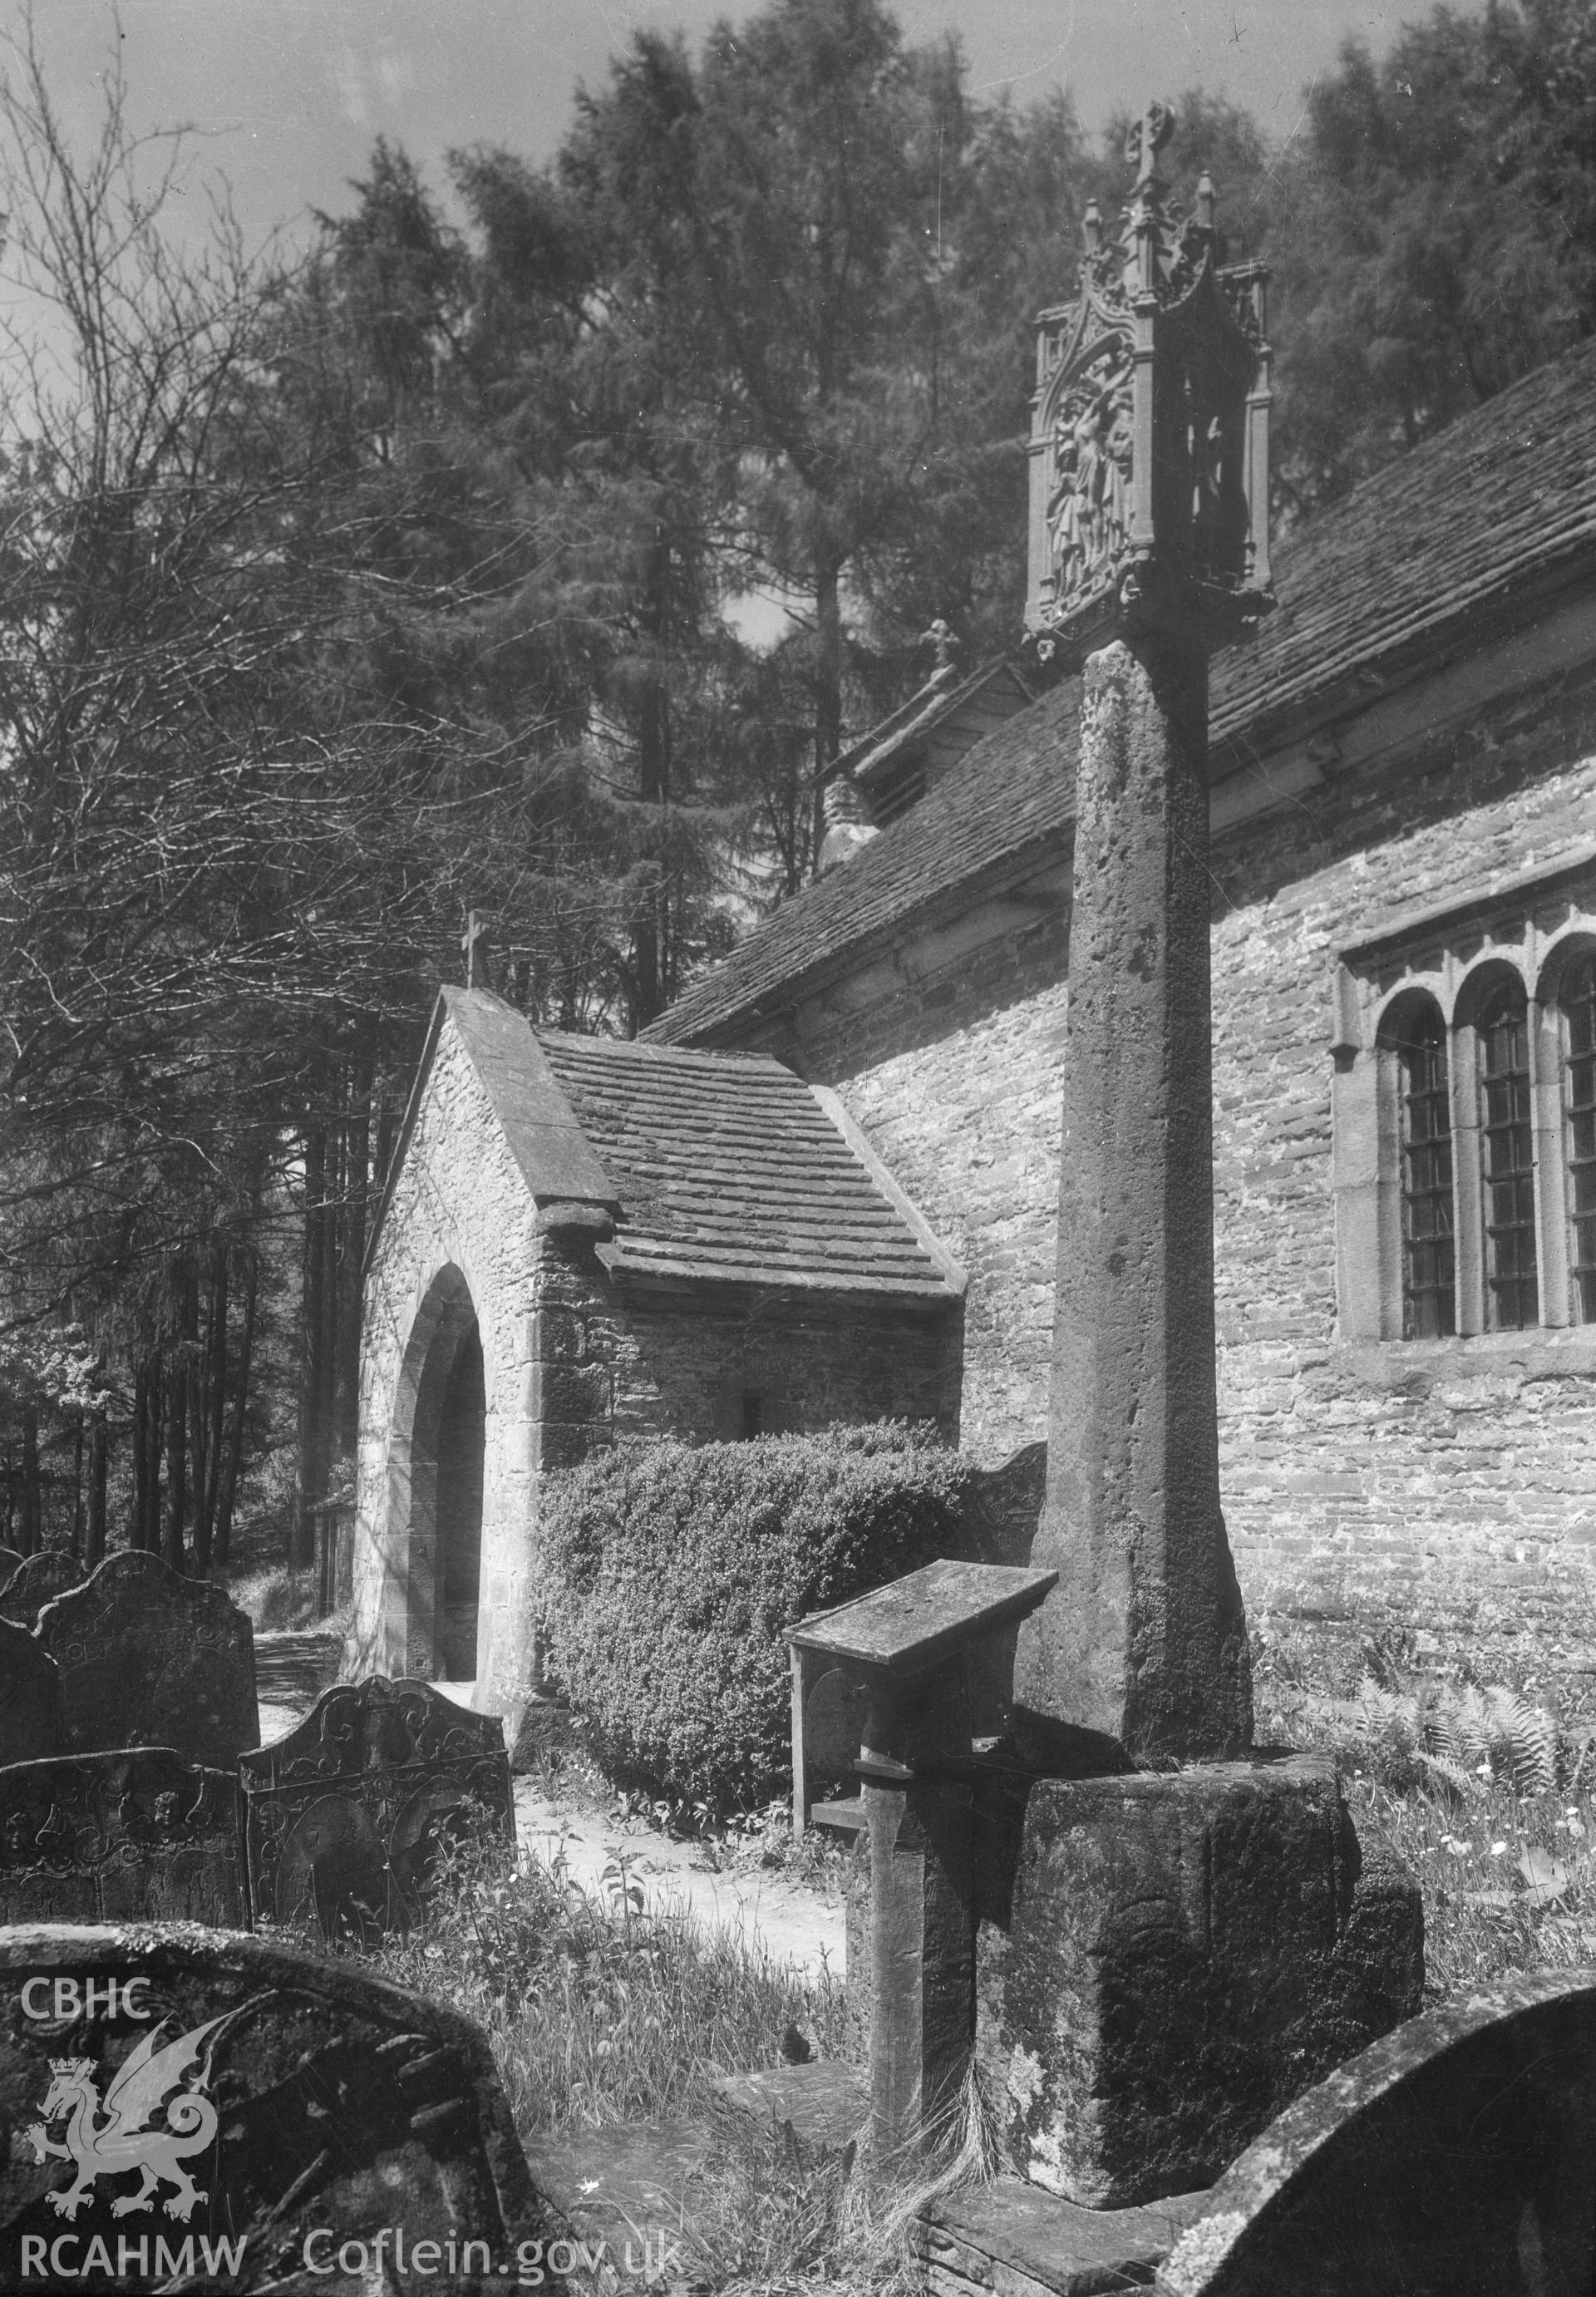 Exterior view of the porch at Patrishow Church, Brecon. taken by W A Call May 1929.